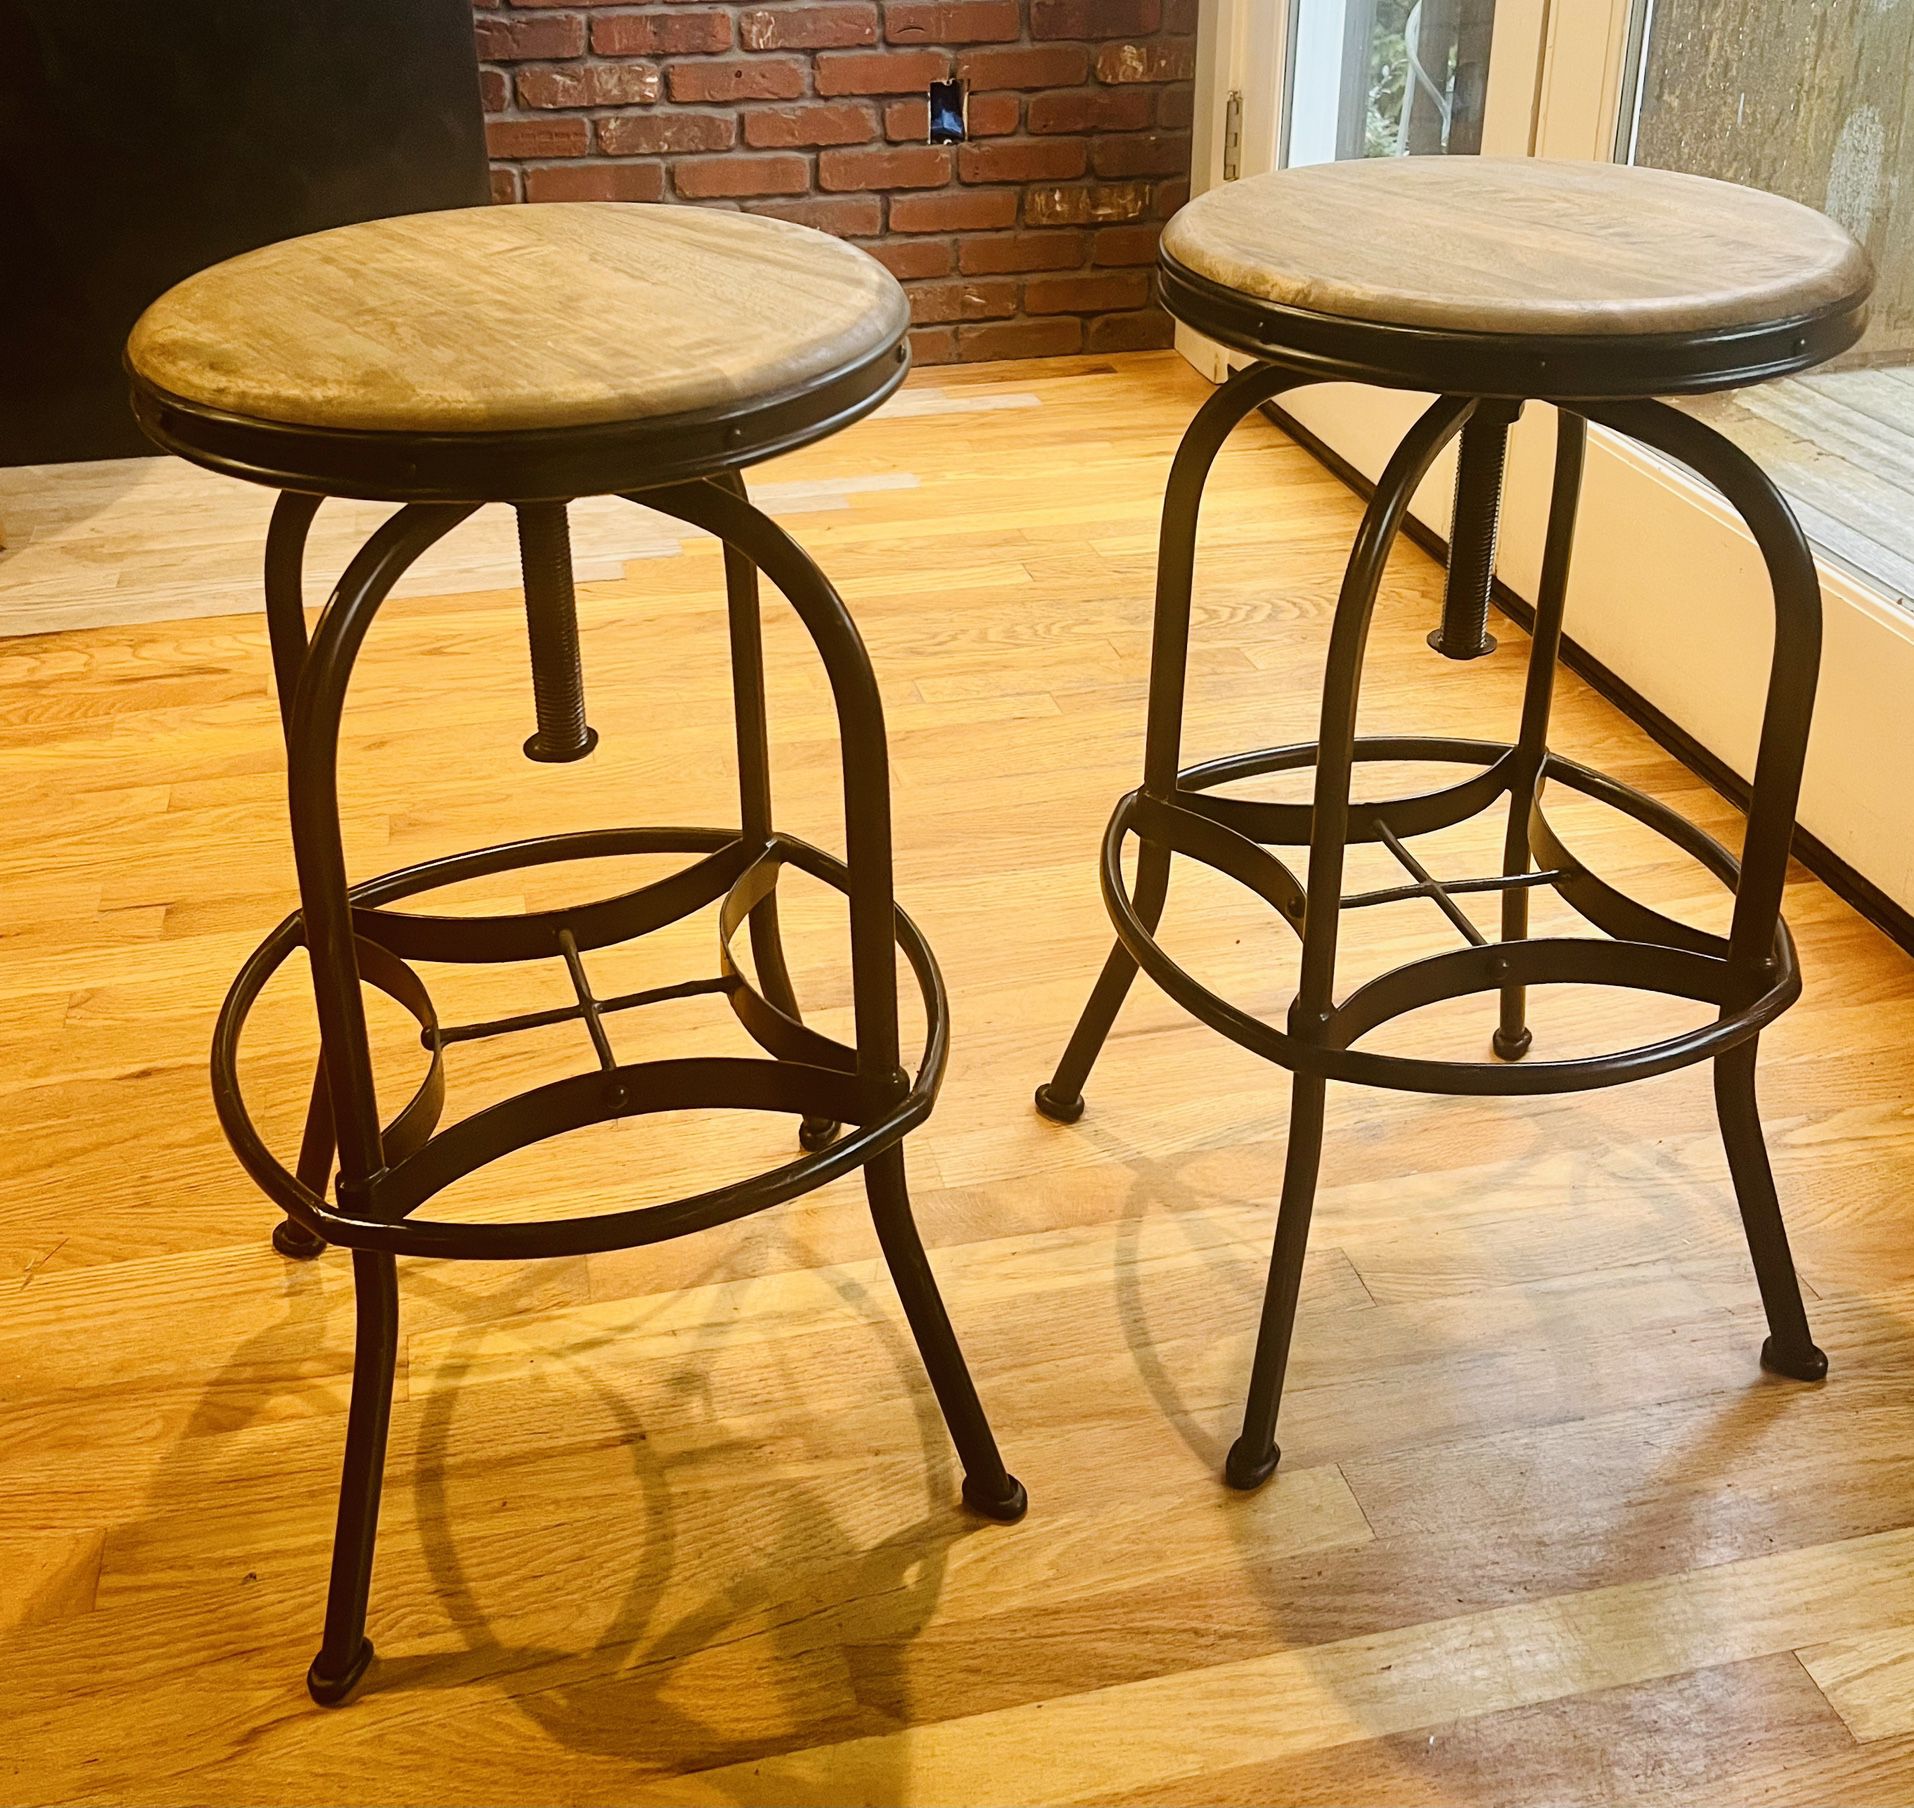 Two Solid Wood And Steel Adjustable Bat Stools for Sale in Kirkland, WA ...